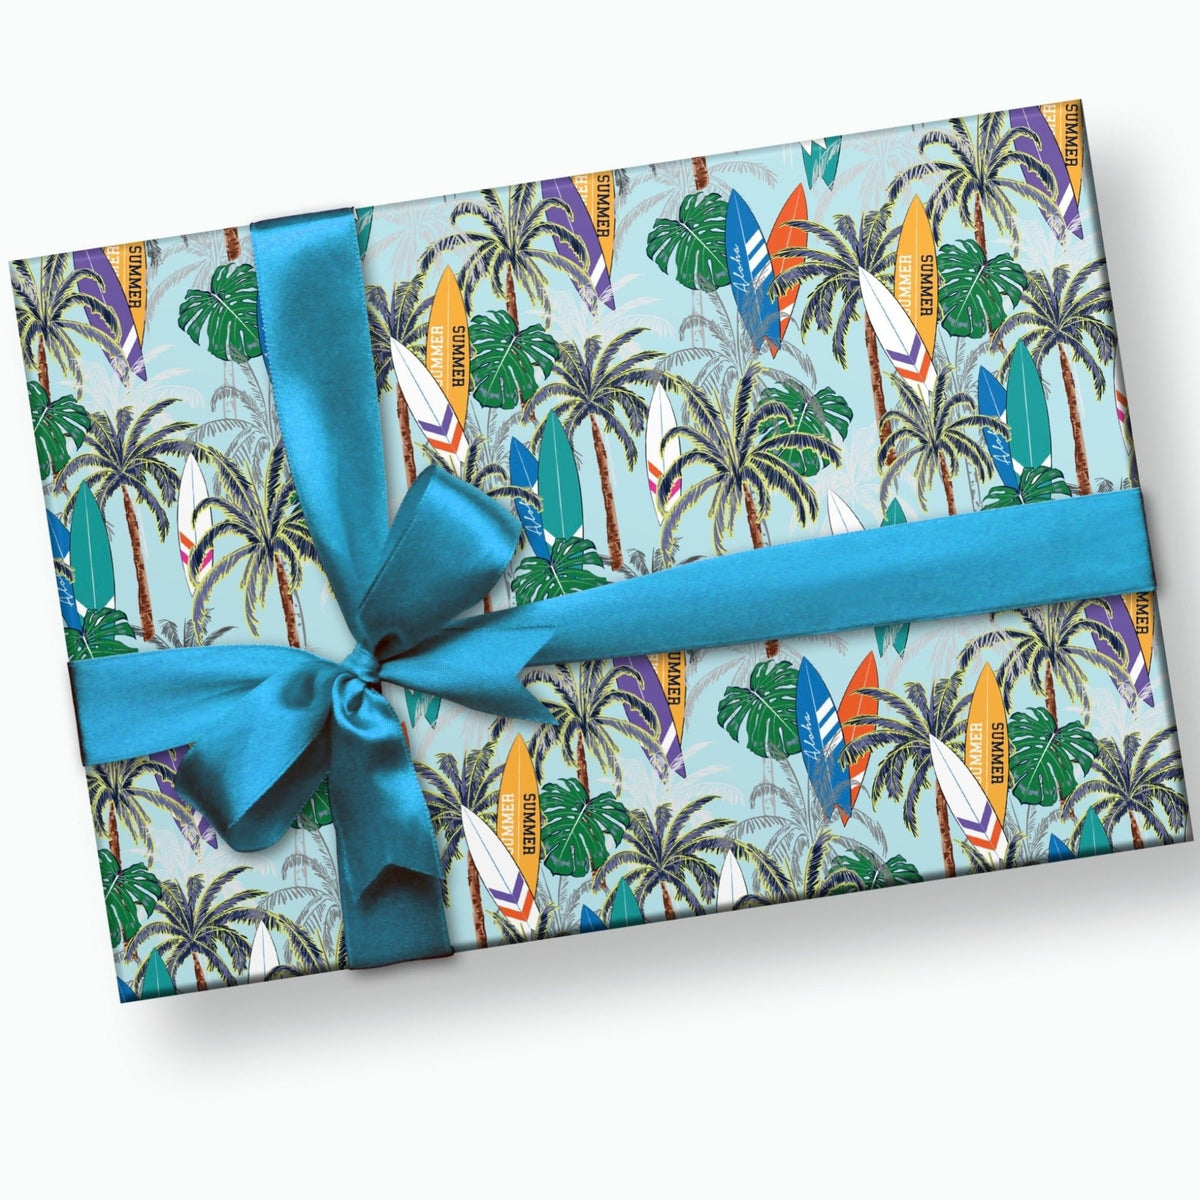 Modern Strawberry Summer Fruit Wrapping Paper by JunkyDotCom